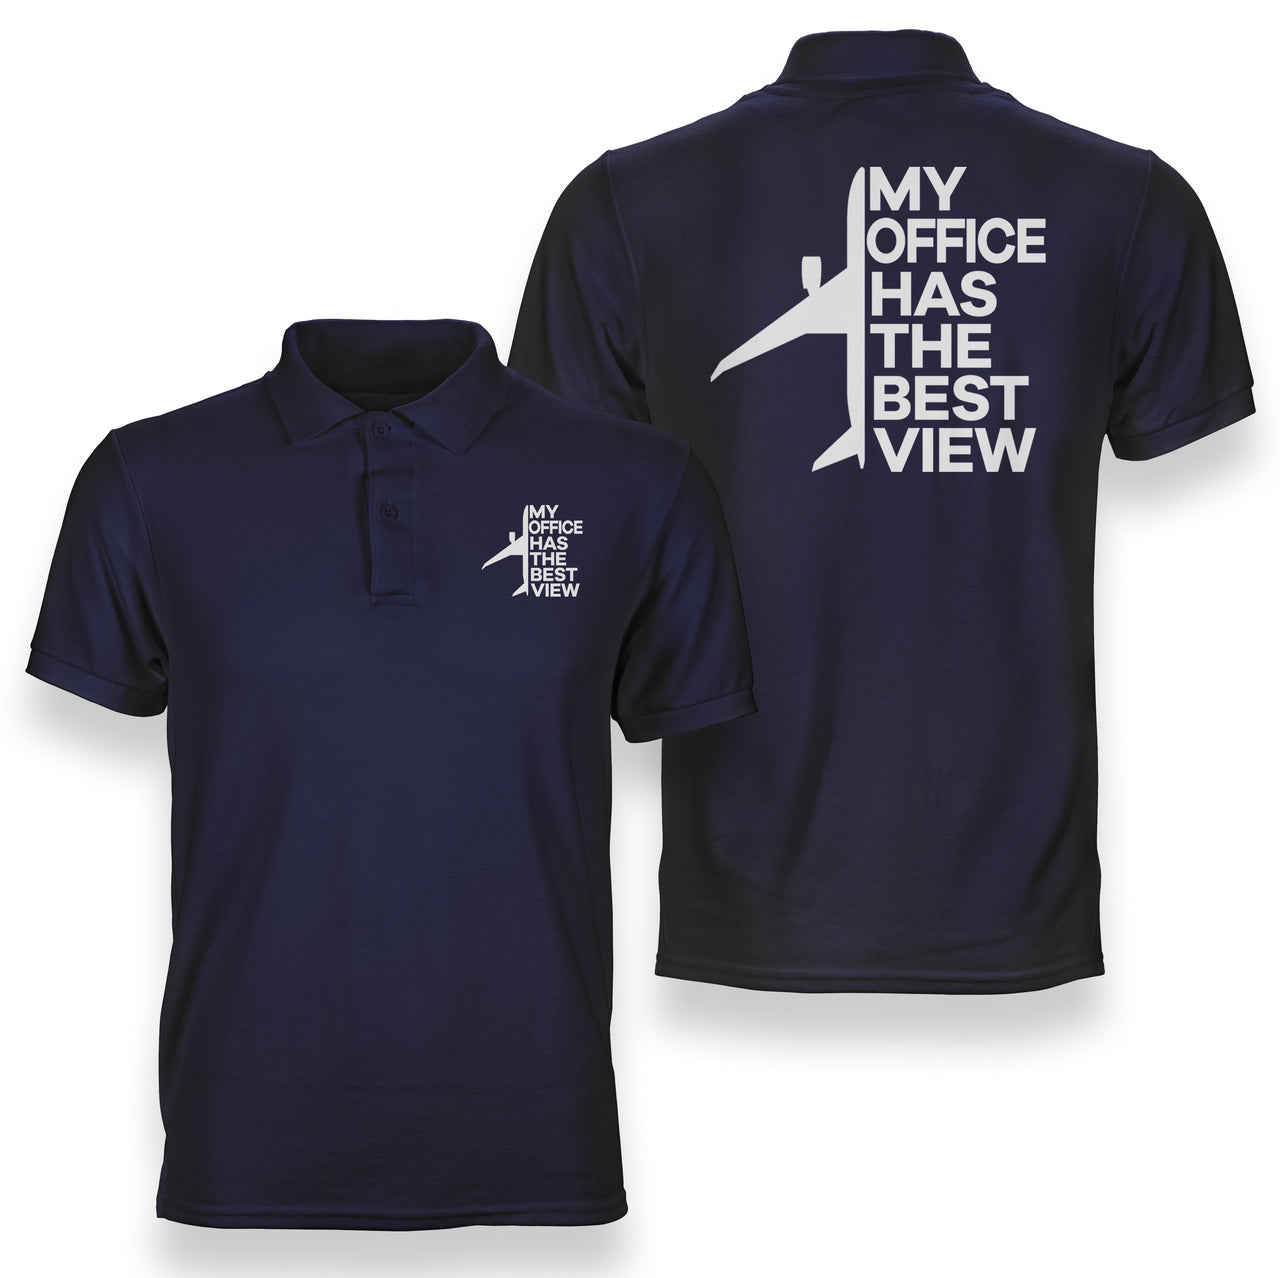 My Office Has The Best View Designed Double Side Polo T-Shirts